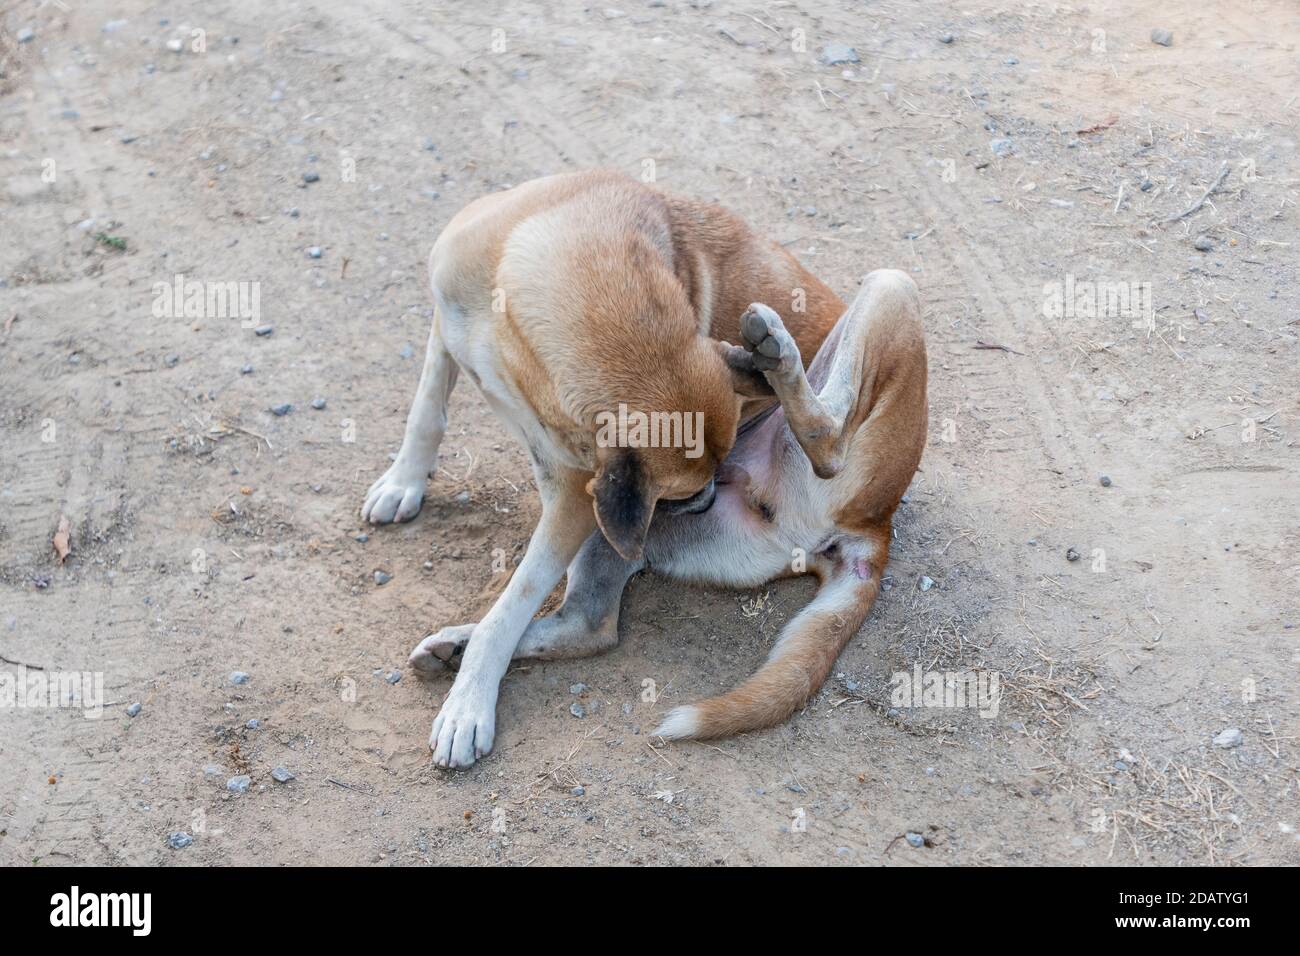 A stray dog is scratcing its neck while sitting on the dirty ground. Stock Photo